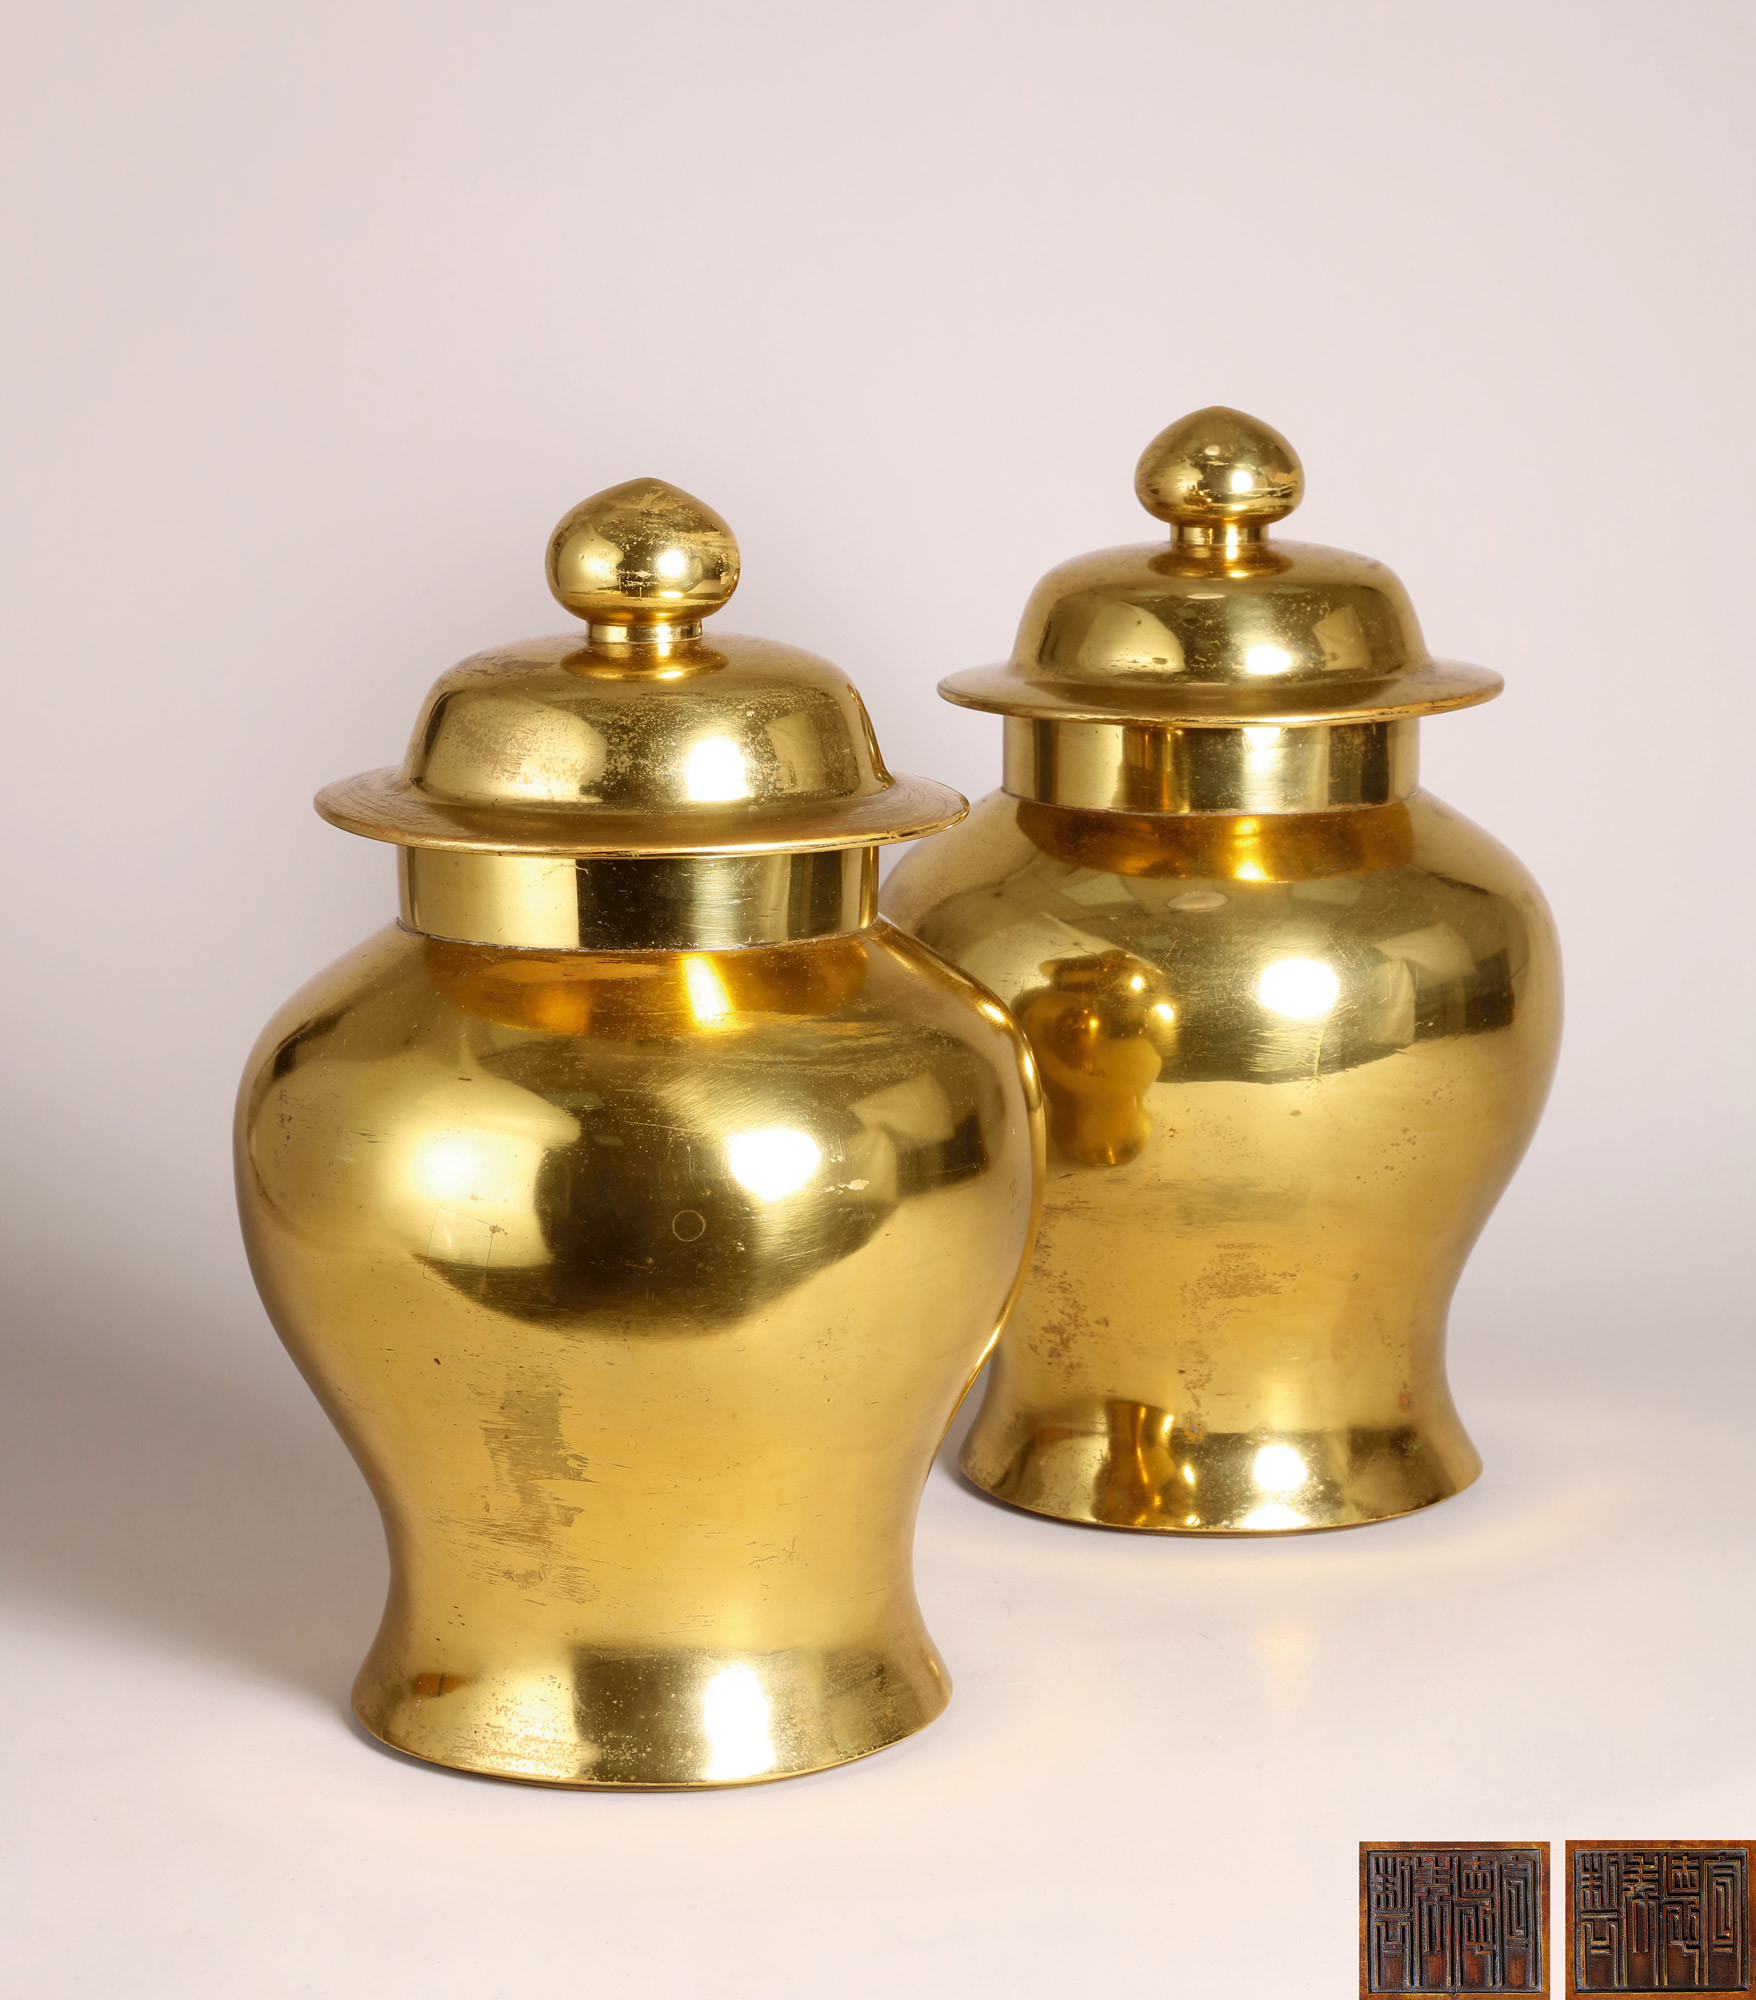 A PAIR OF GILT-BRONZE JARS WITH COVER